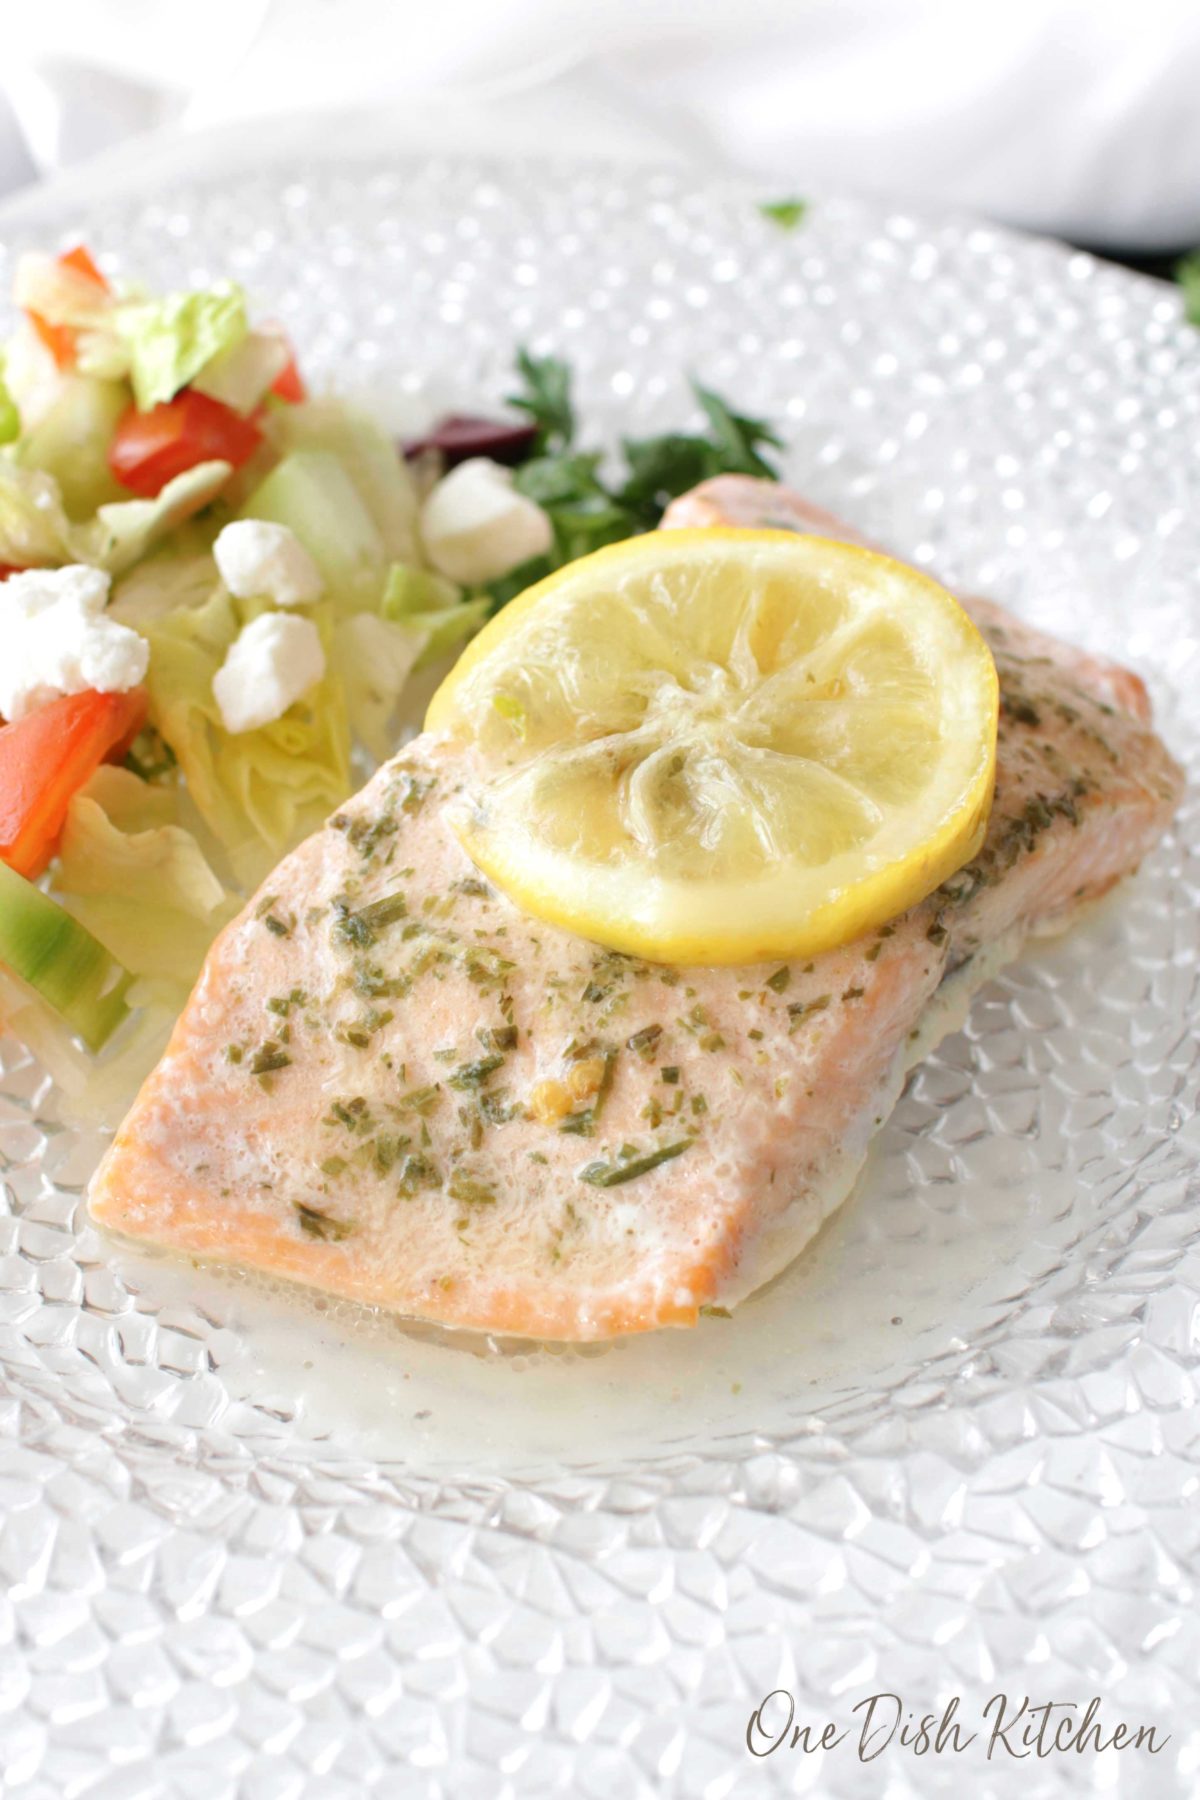 a piece of salmon that was baked in foil on a white plate topped with a lemon slice next to a salad.